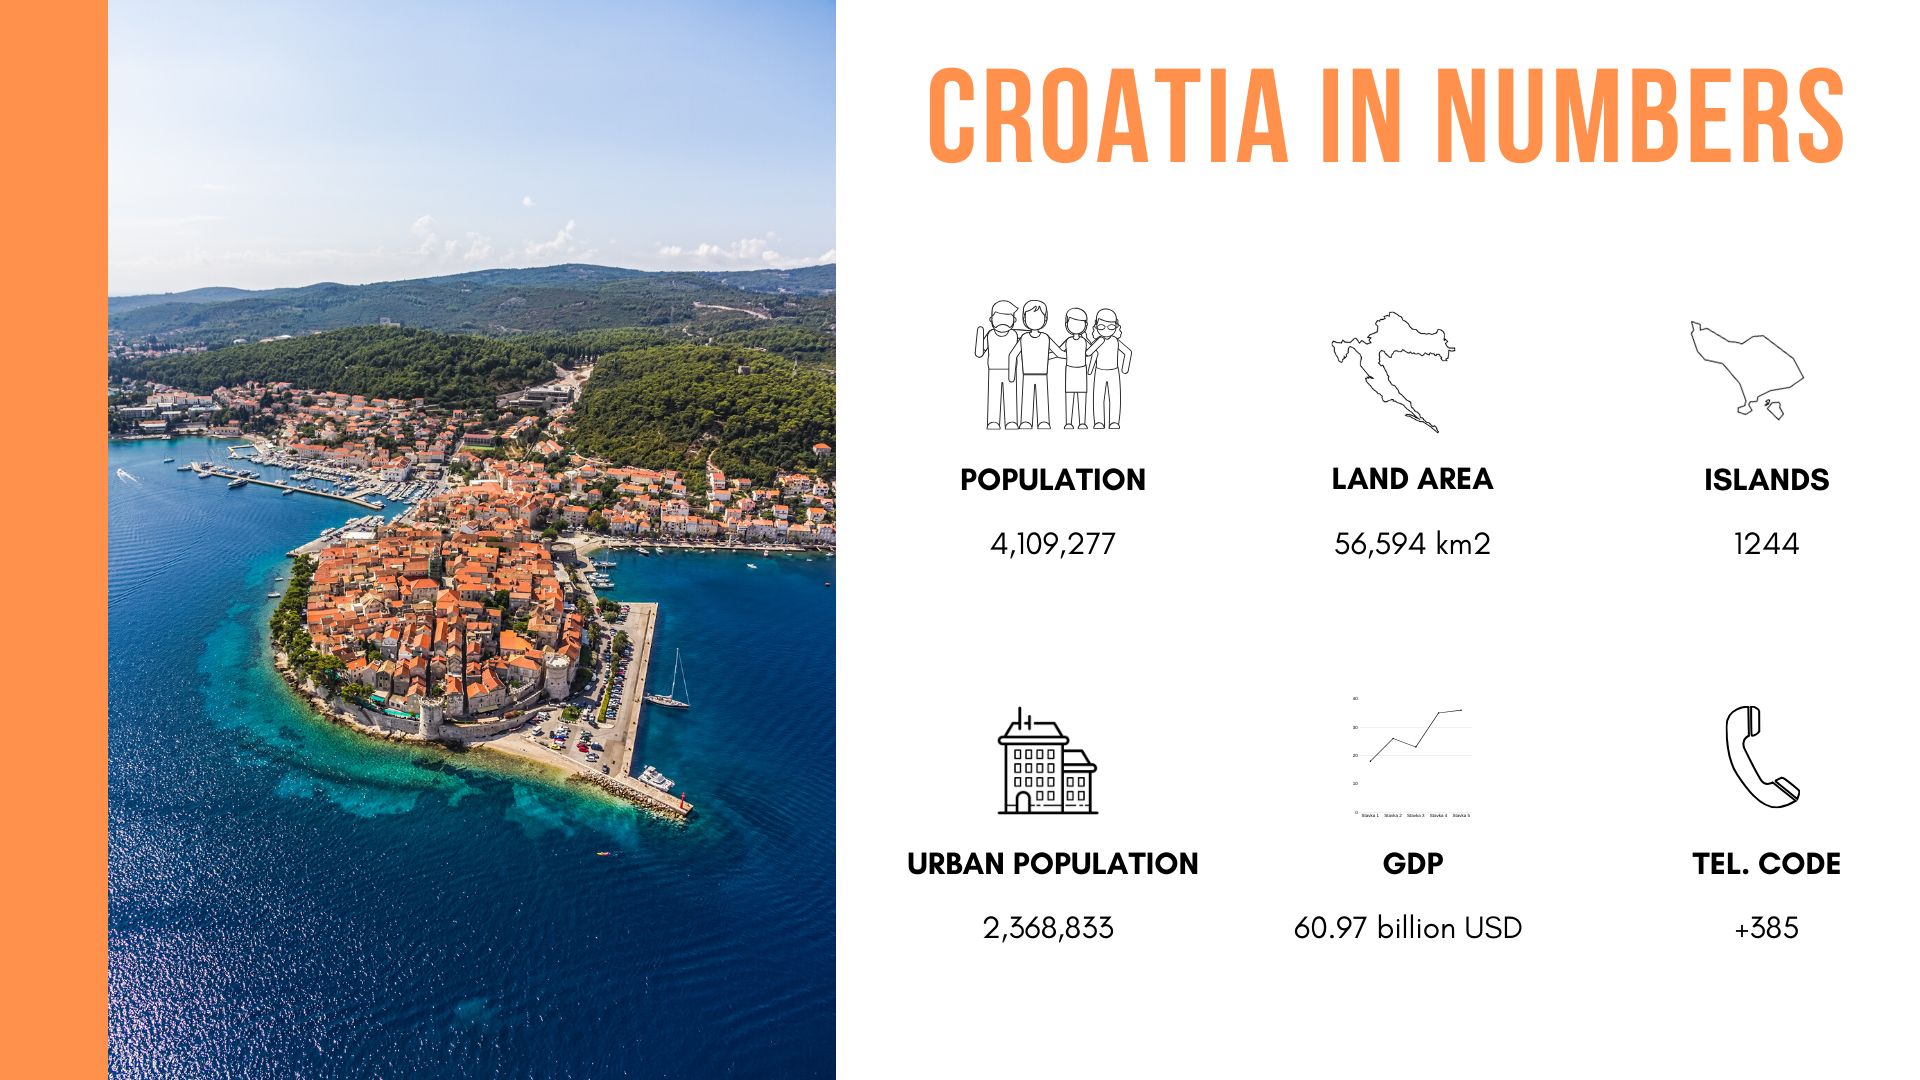 The basic information about the Republic of Croatia expressed in numbers and icons.